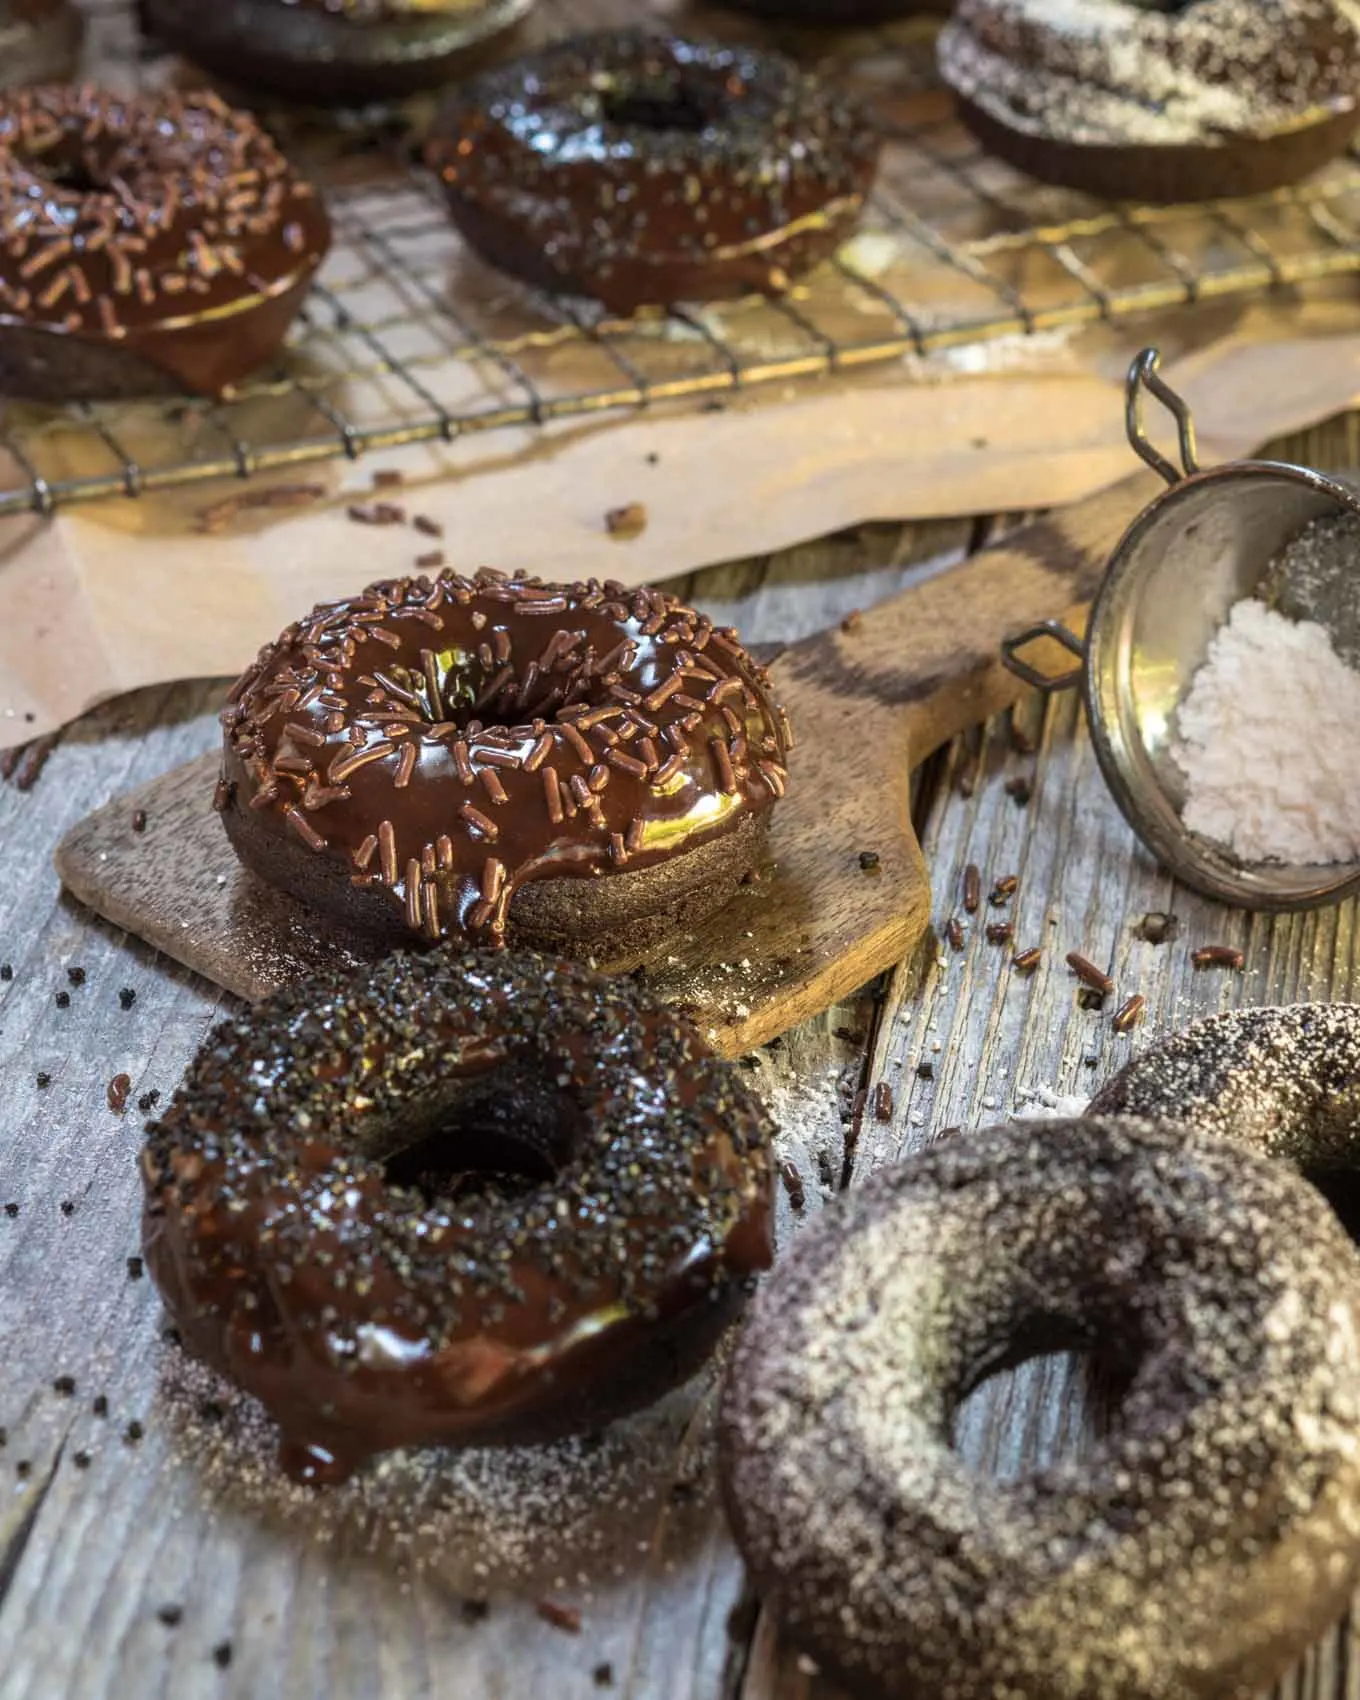 Baked chocolate donuts on a white wooden background that have been glazed and sprinkled or just dusted with powdered sugar. A cooling rack of more donuts sits in the background.